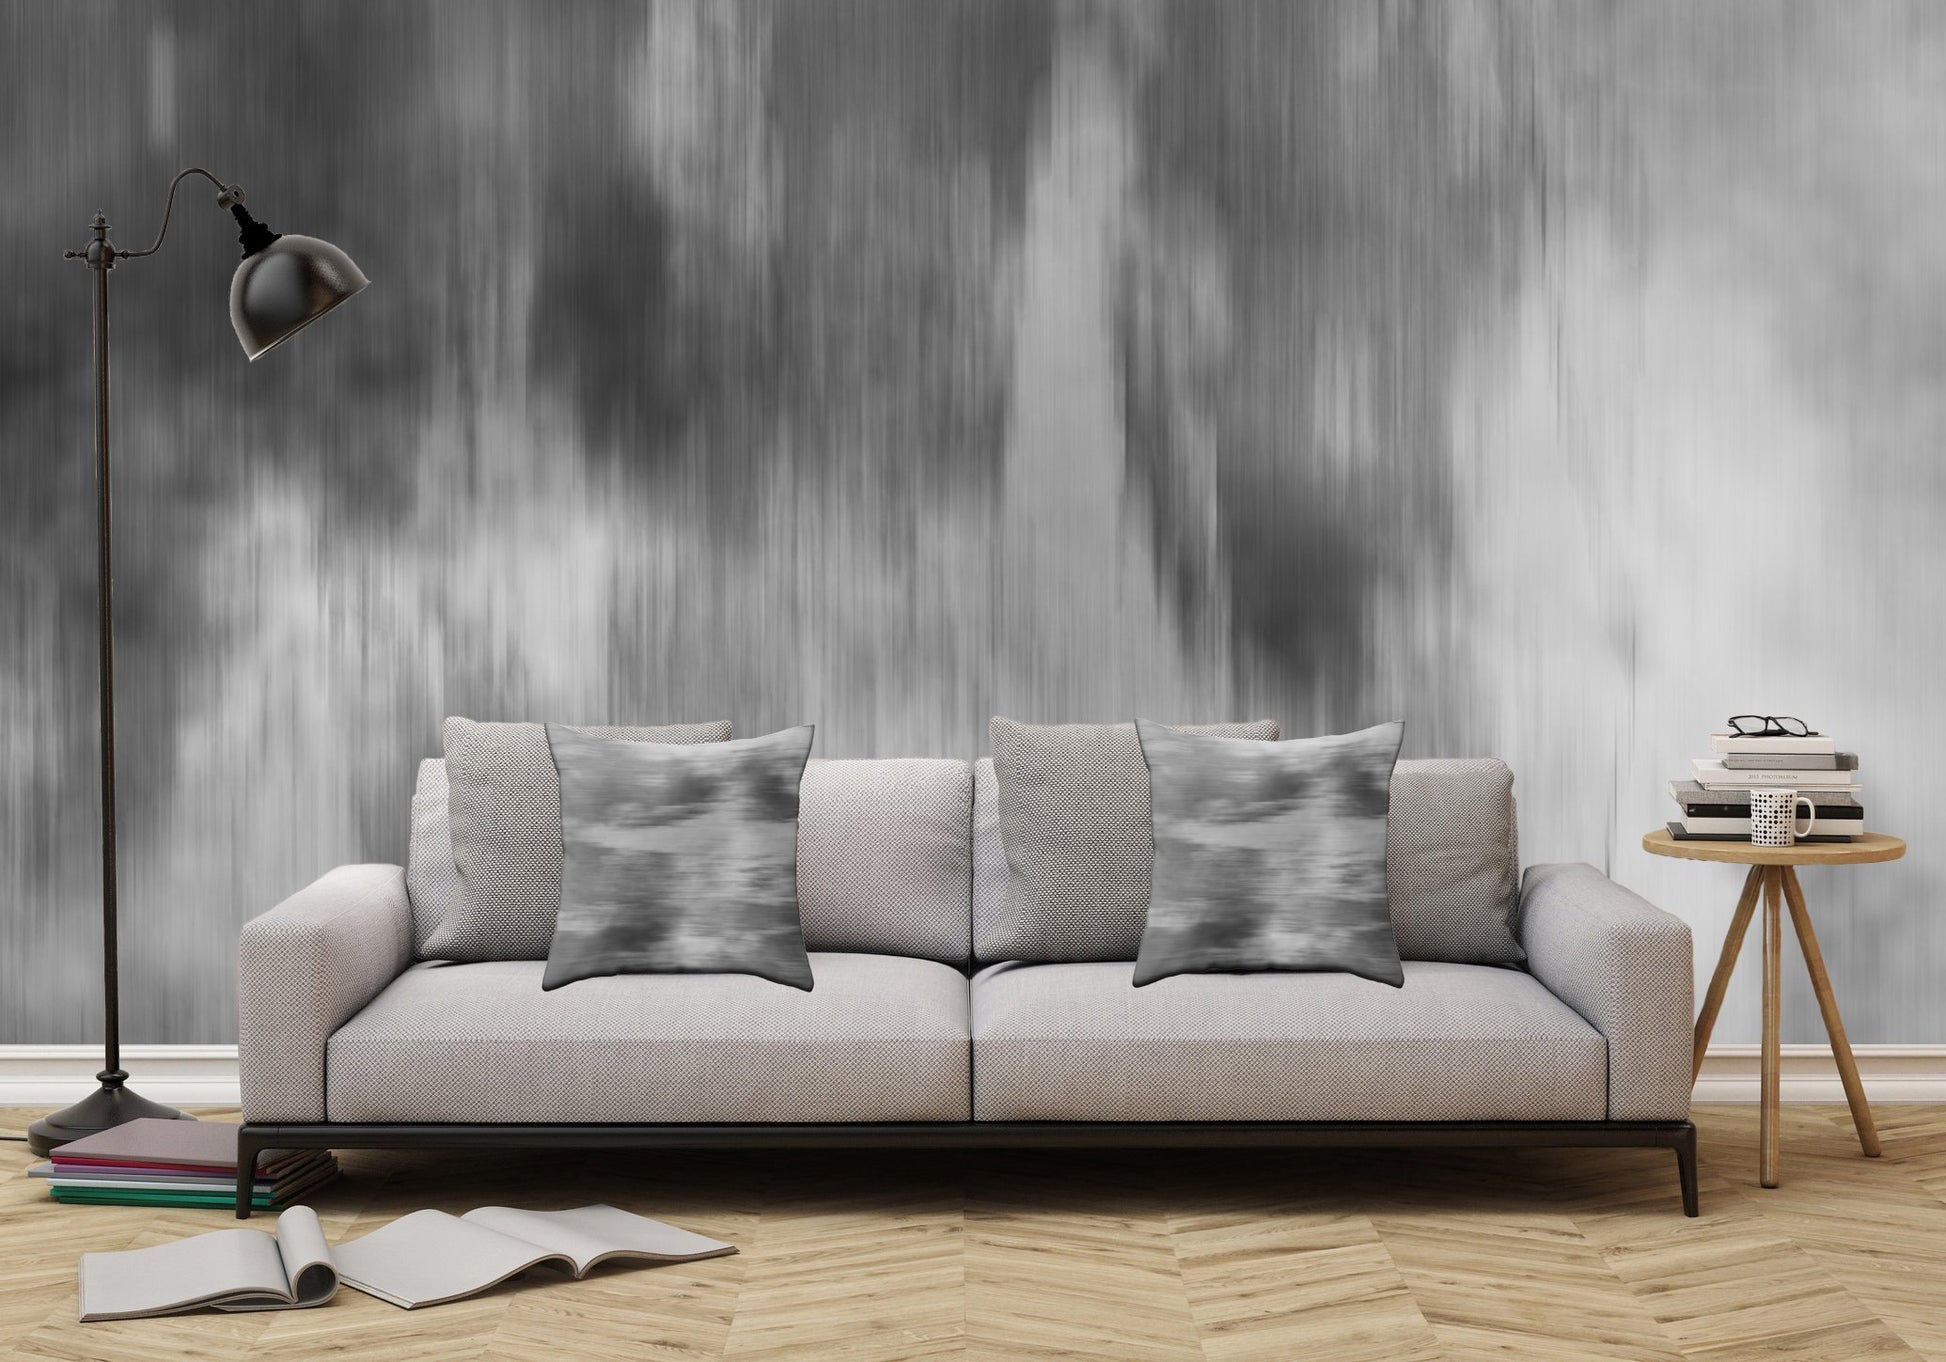 Smokey Mist Illustration - Peel and Stick Removable Wallpaper Full Size Wall Mural  - PIPAFINEART